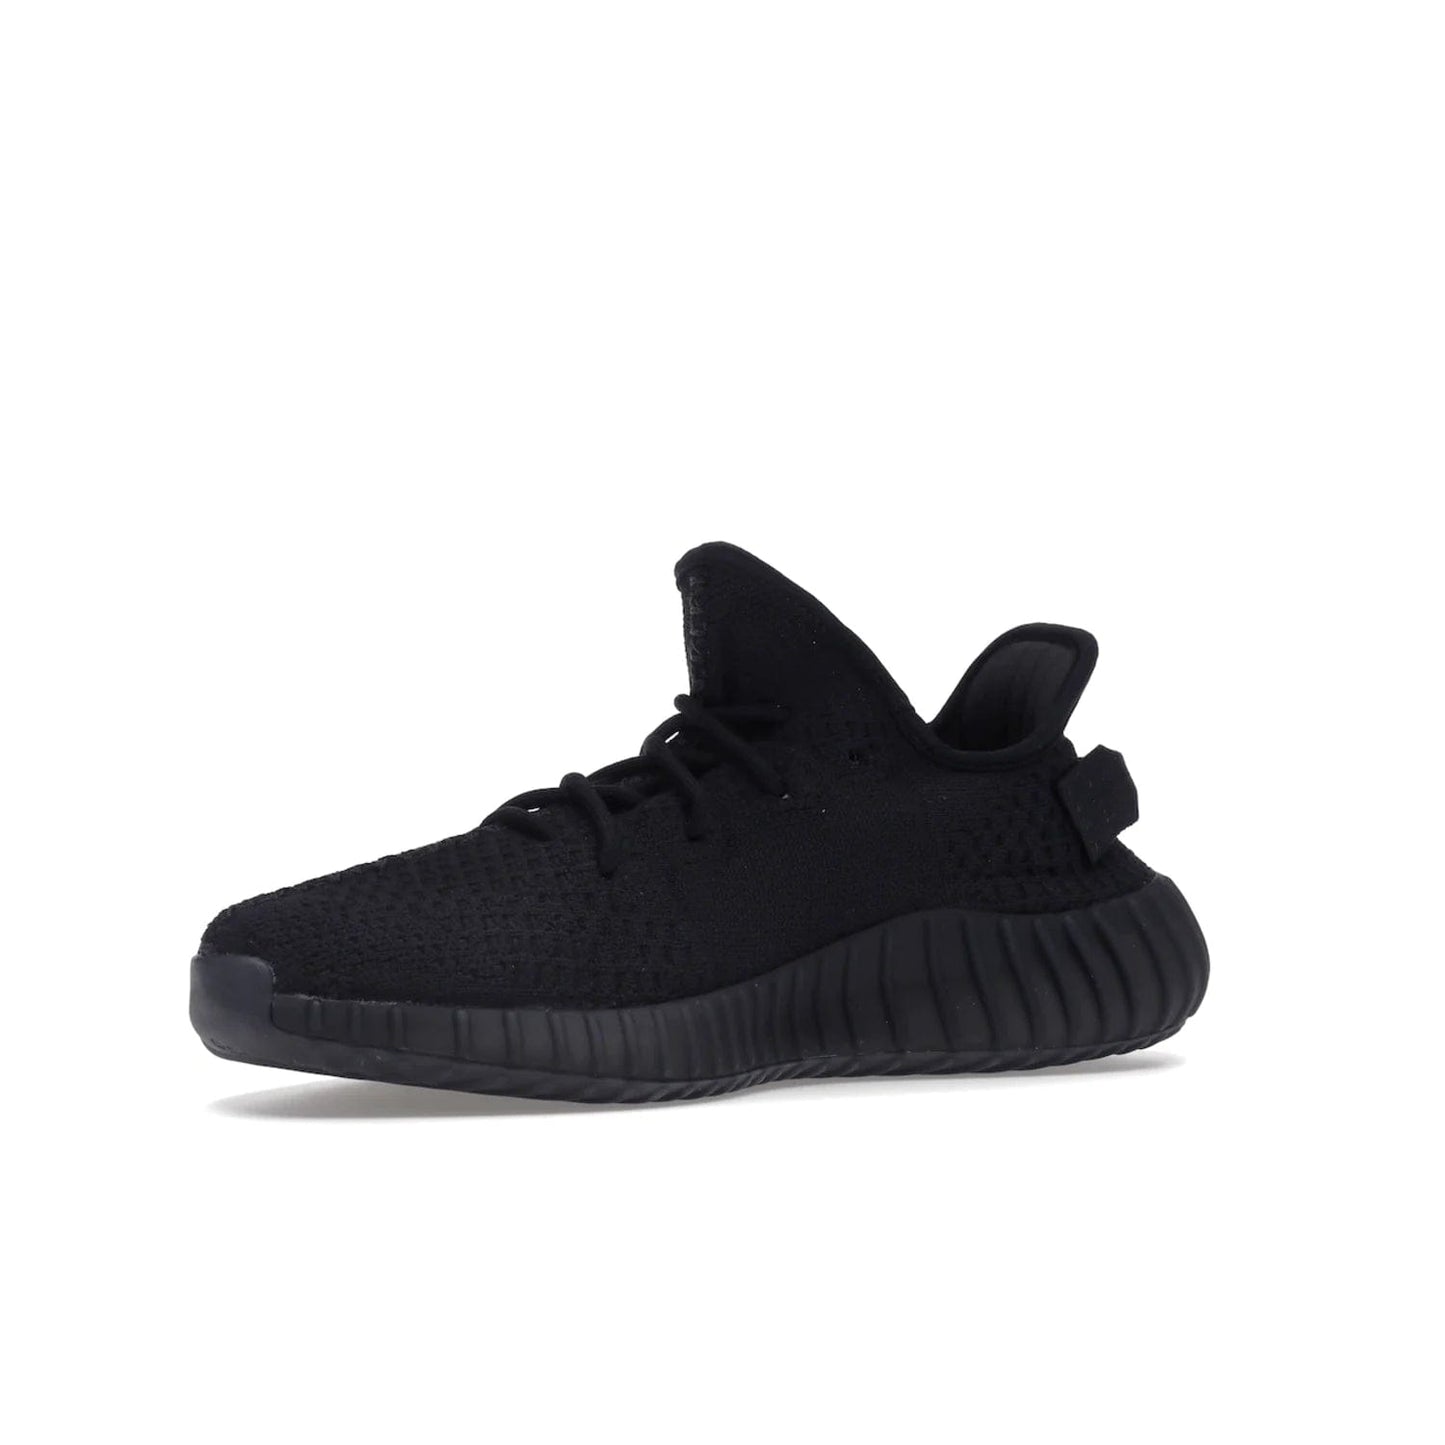 adidas Yeezy Boost 350 V2 Onyx - Image 16 - Only at www.BallersClubKickz.com - Adidas Yeezy Boost 350 V2 Onyx Triple Black shoes for comfort and style. Arriving Spring 2022.